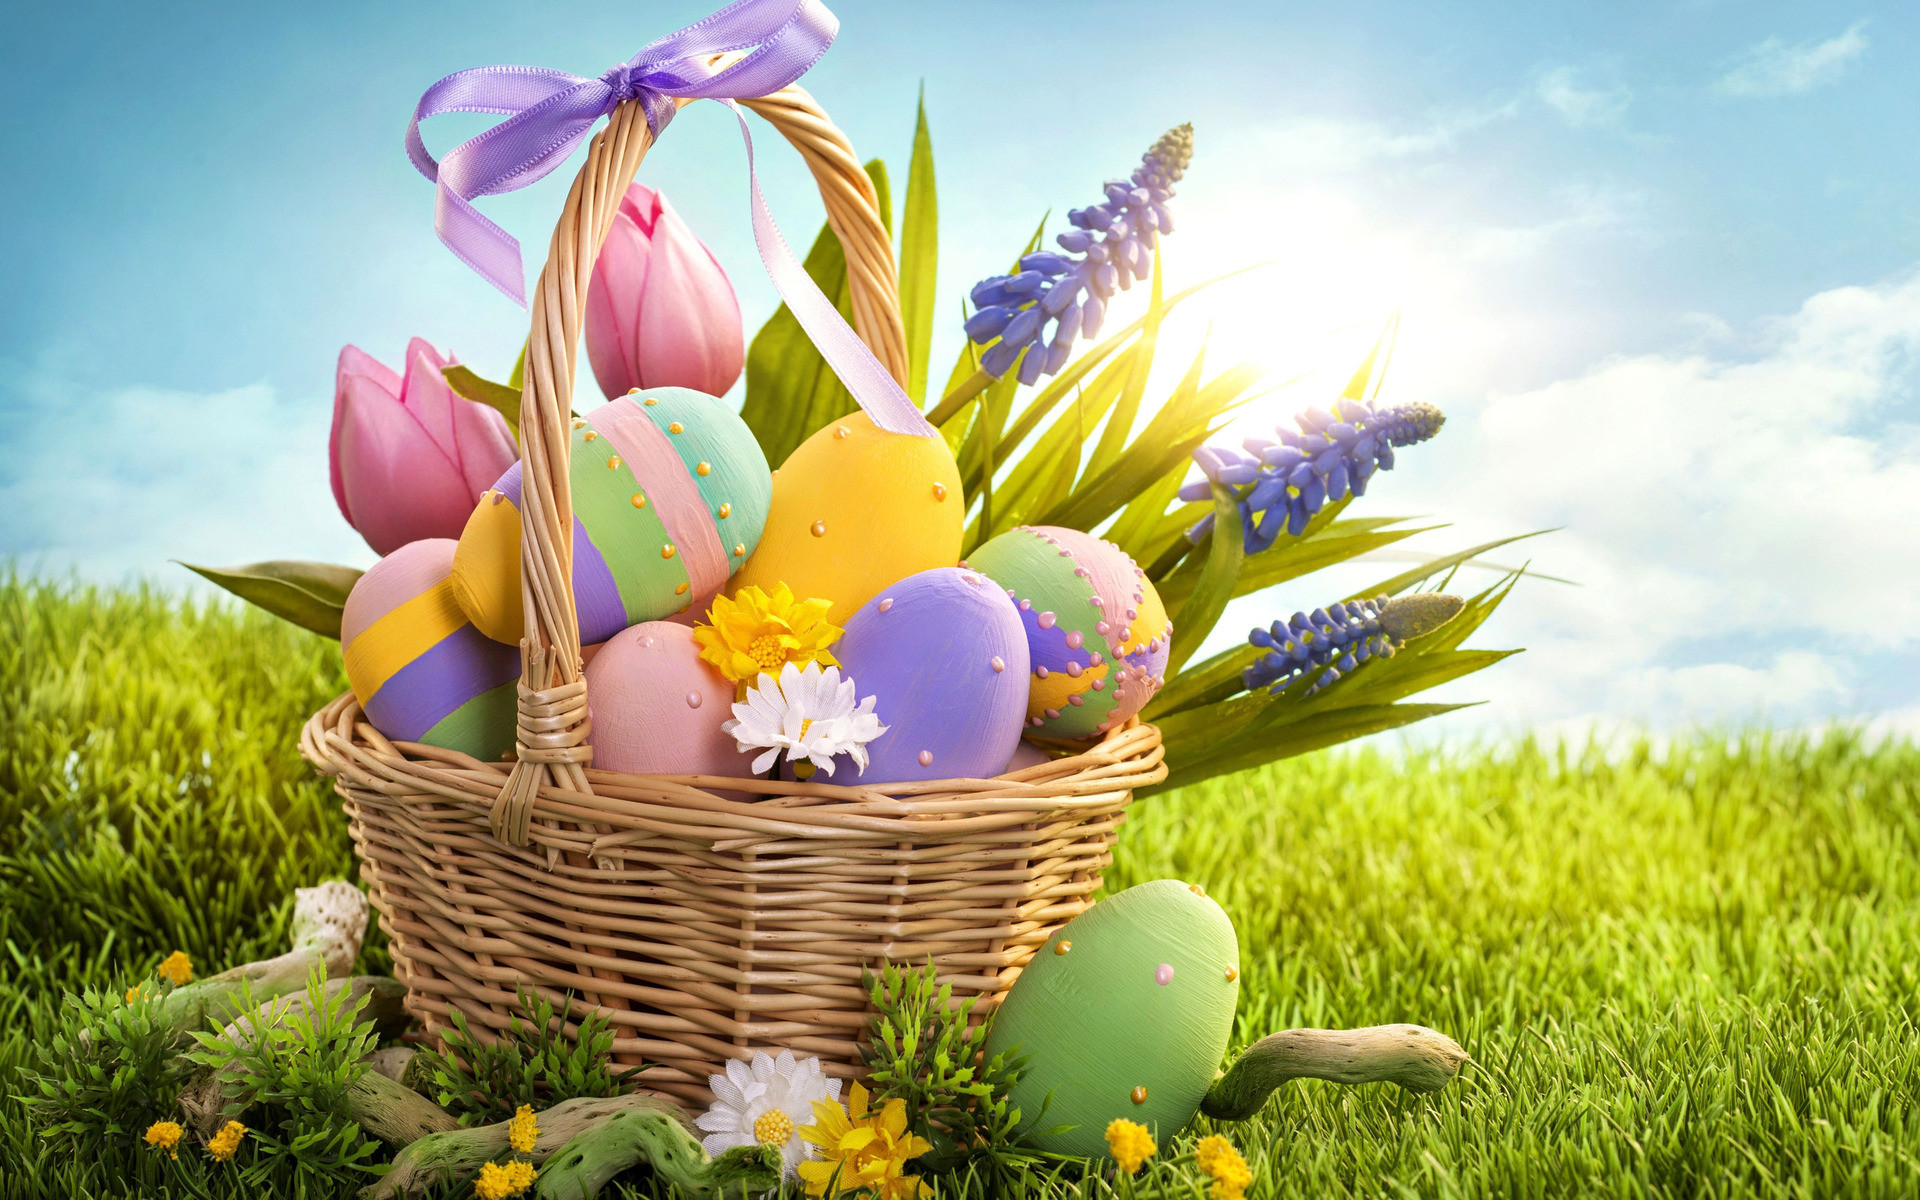 Easter wallpaper free download which is under the easter wallpapers